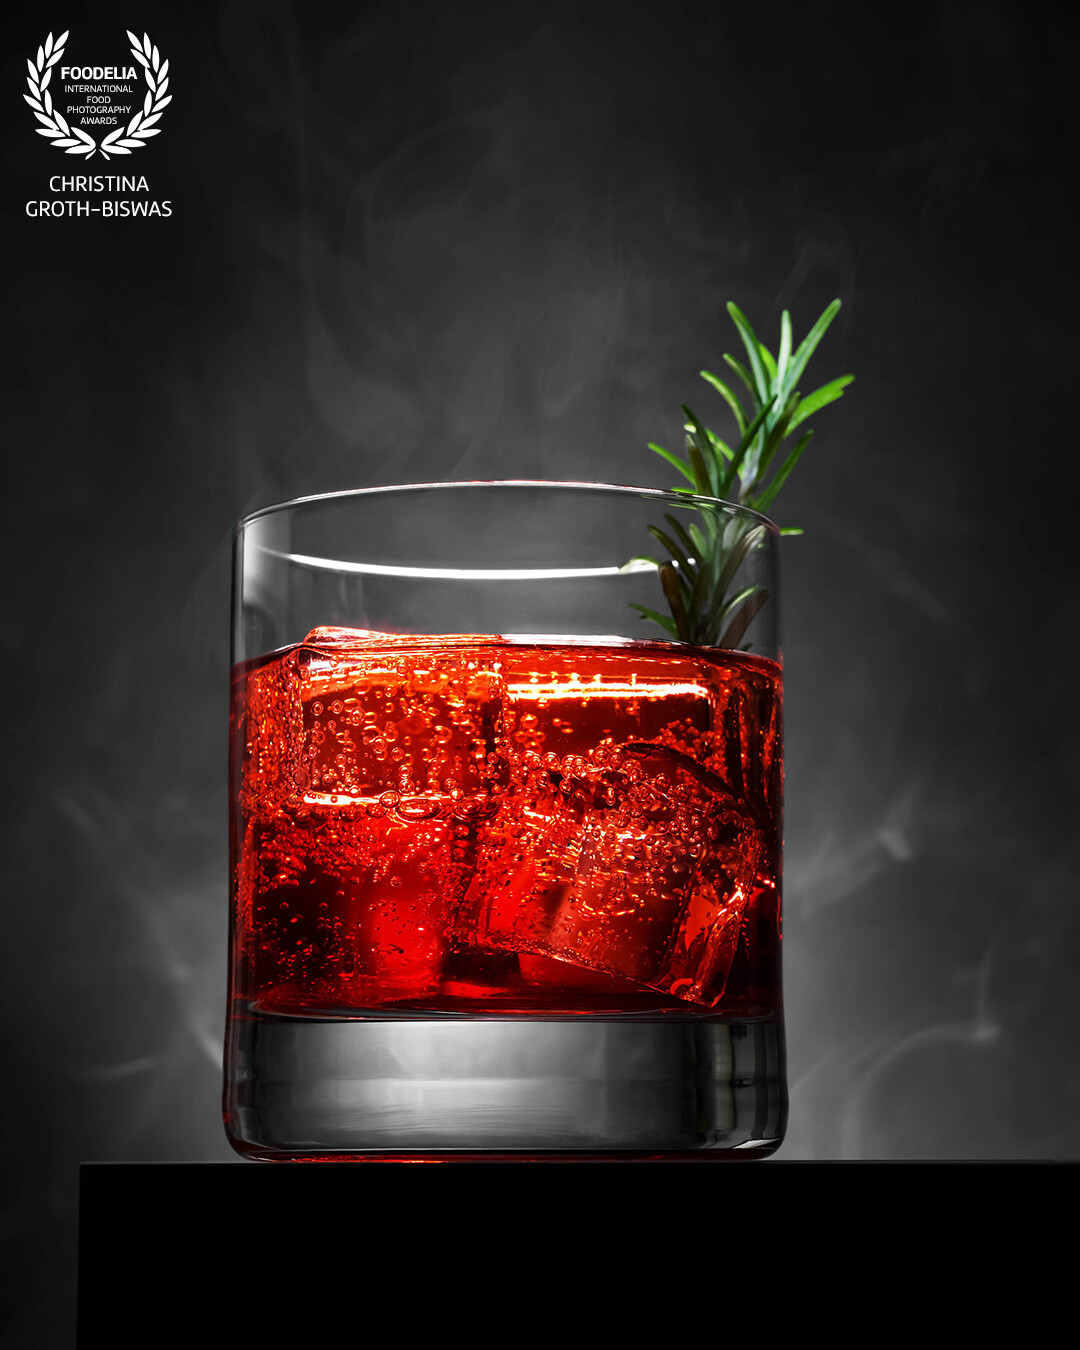 Campari soda, garnished with fresh rosemary. <br />
<br />
I placed the main light behind the drink to bring out the intense red colour of the Campari and used a reflector pointing to the rosemary. The smoke in the back is real.